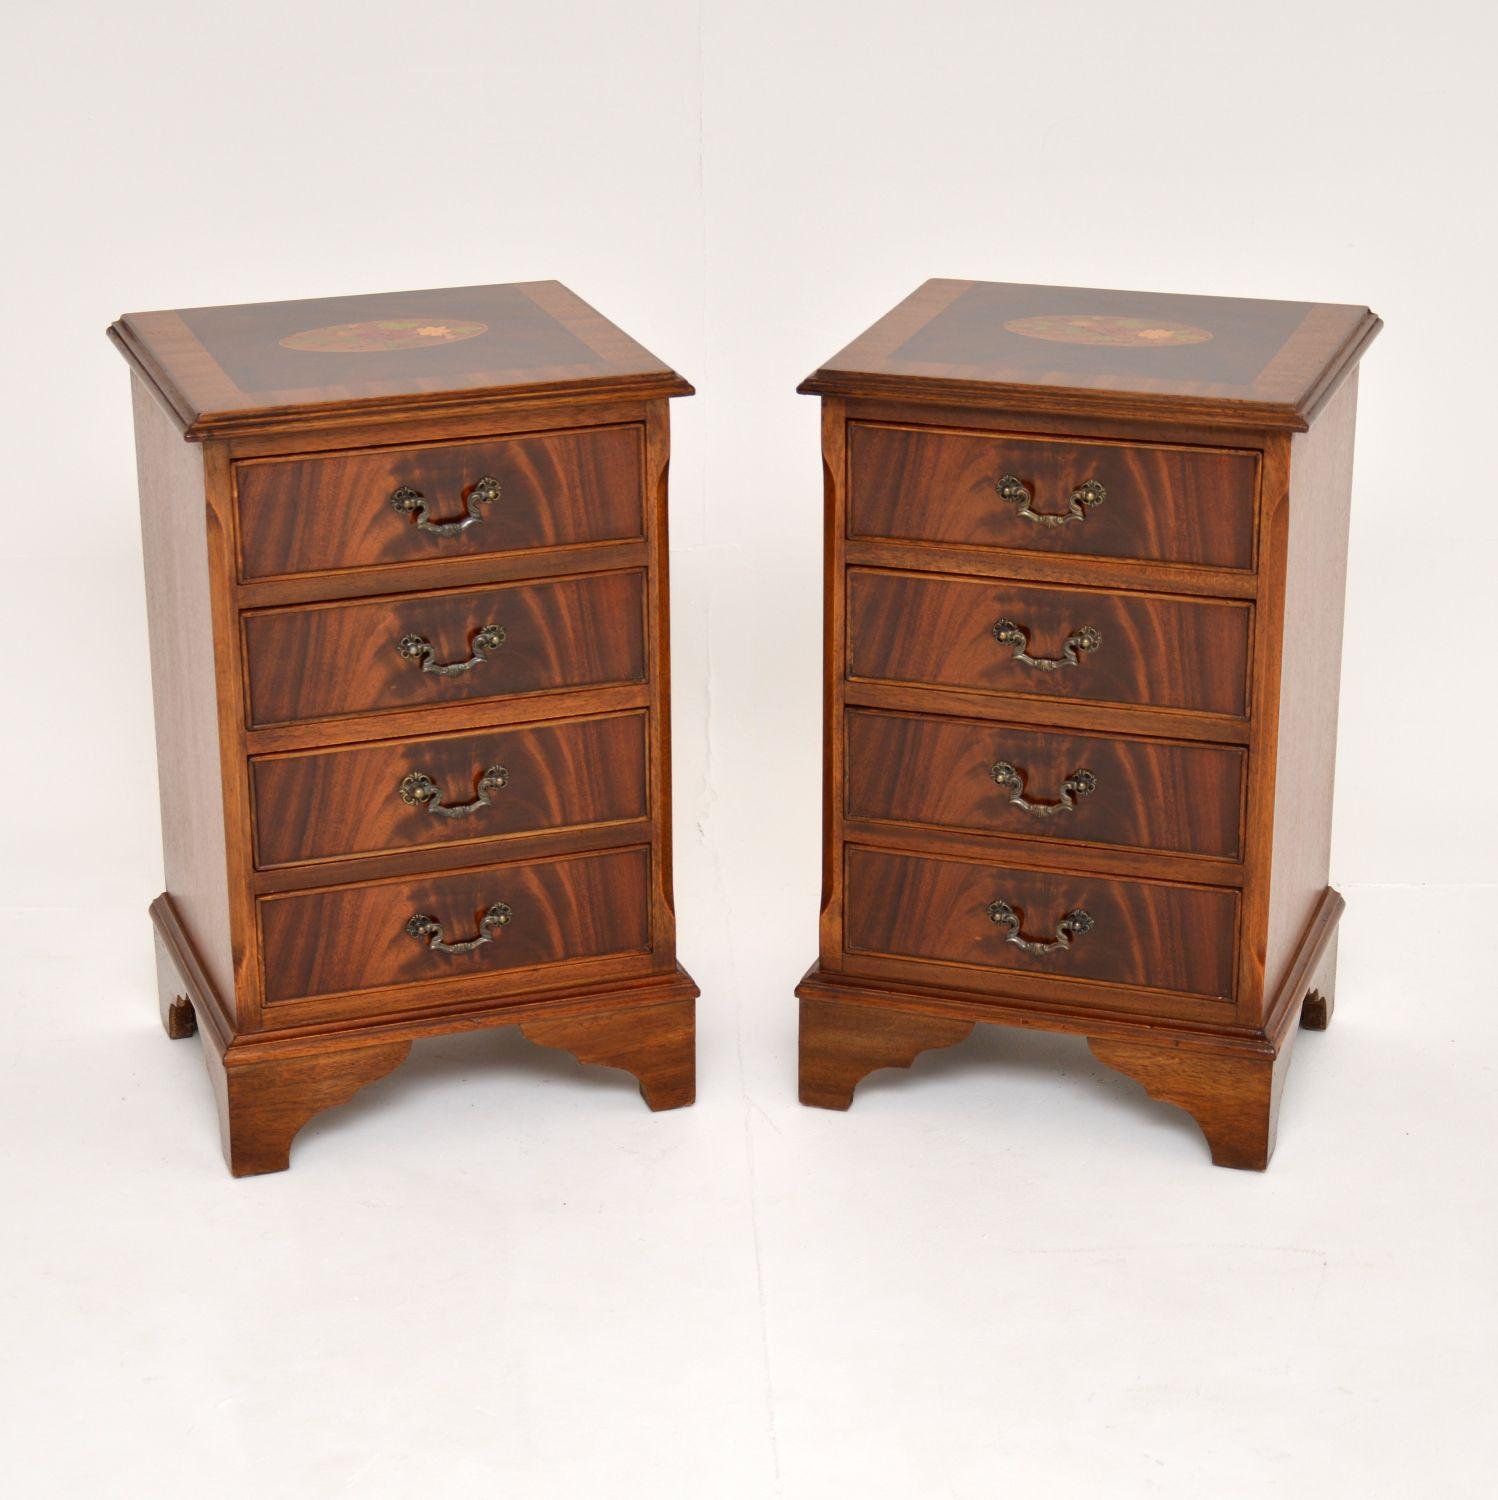 An excellent pair of antique bedside chests in the Georgian style. These were made in England, they date from around the 1950’s.

The quality is amazing, they are a very useful size and each has stunning floral marquetry on the top. They are